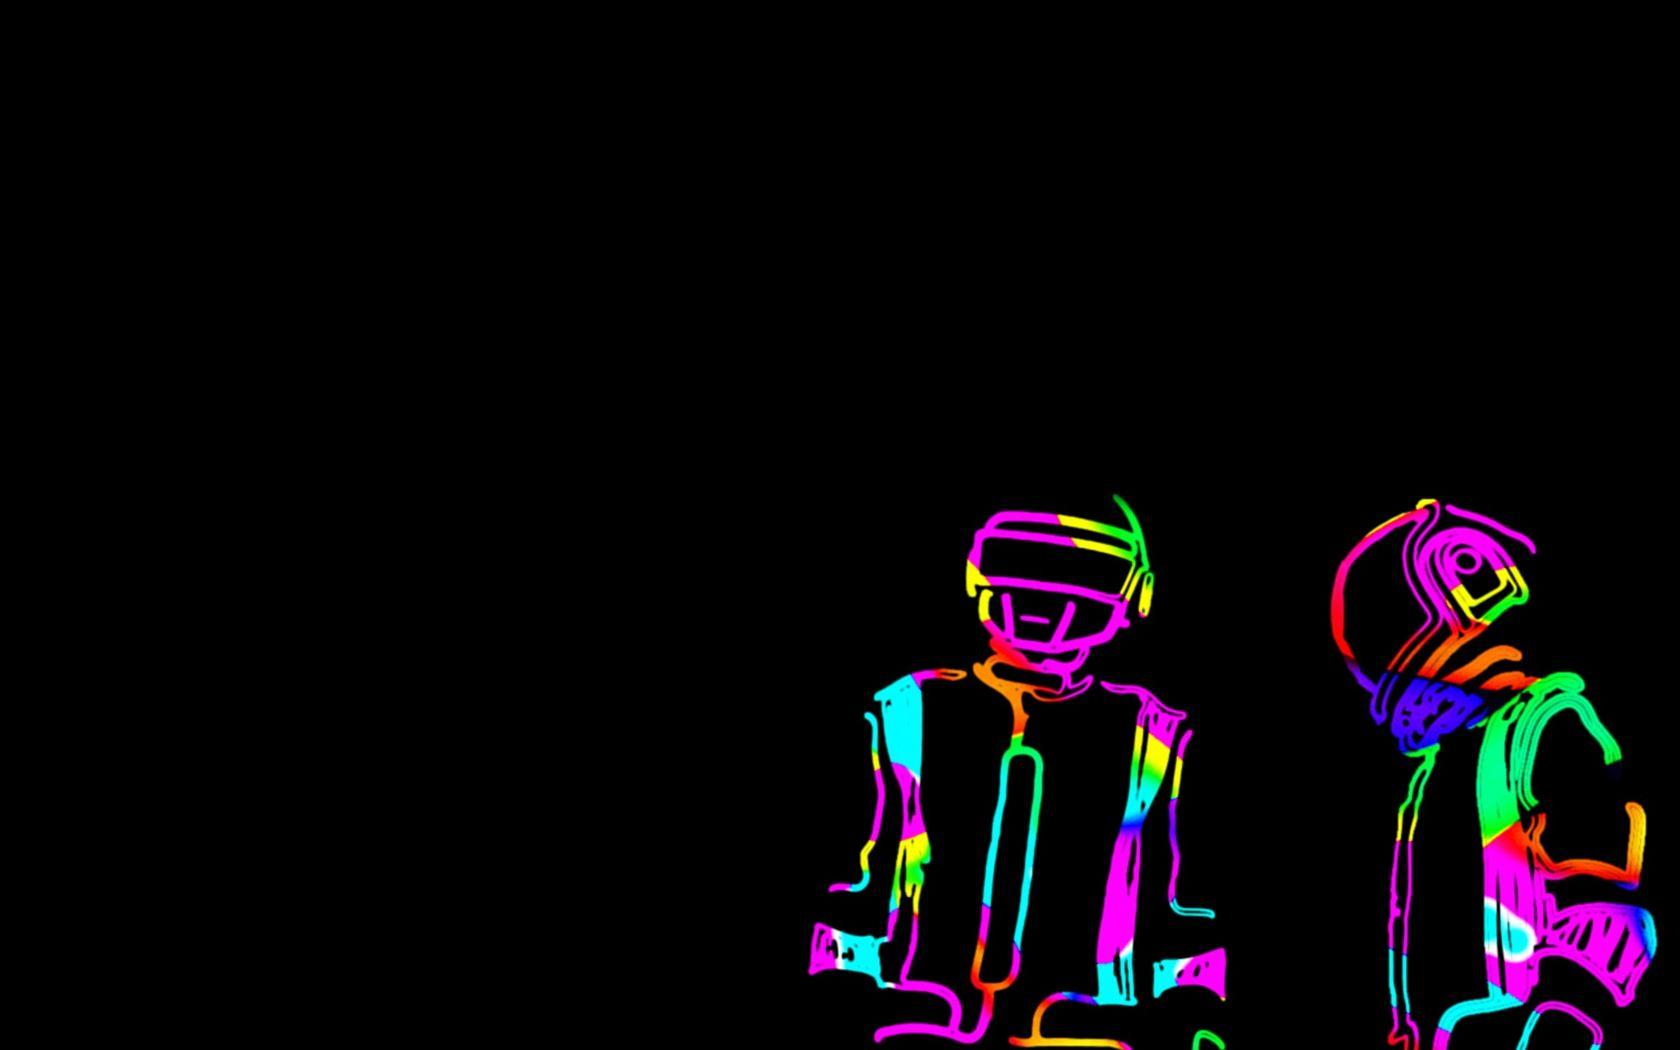 Daft Punk Wallpaper for PC. Full HD Picture